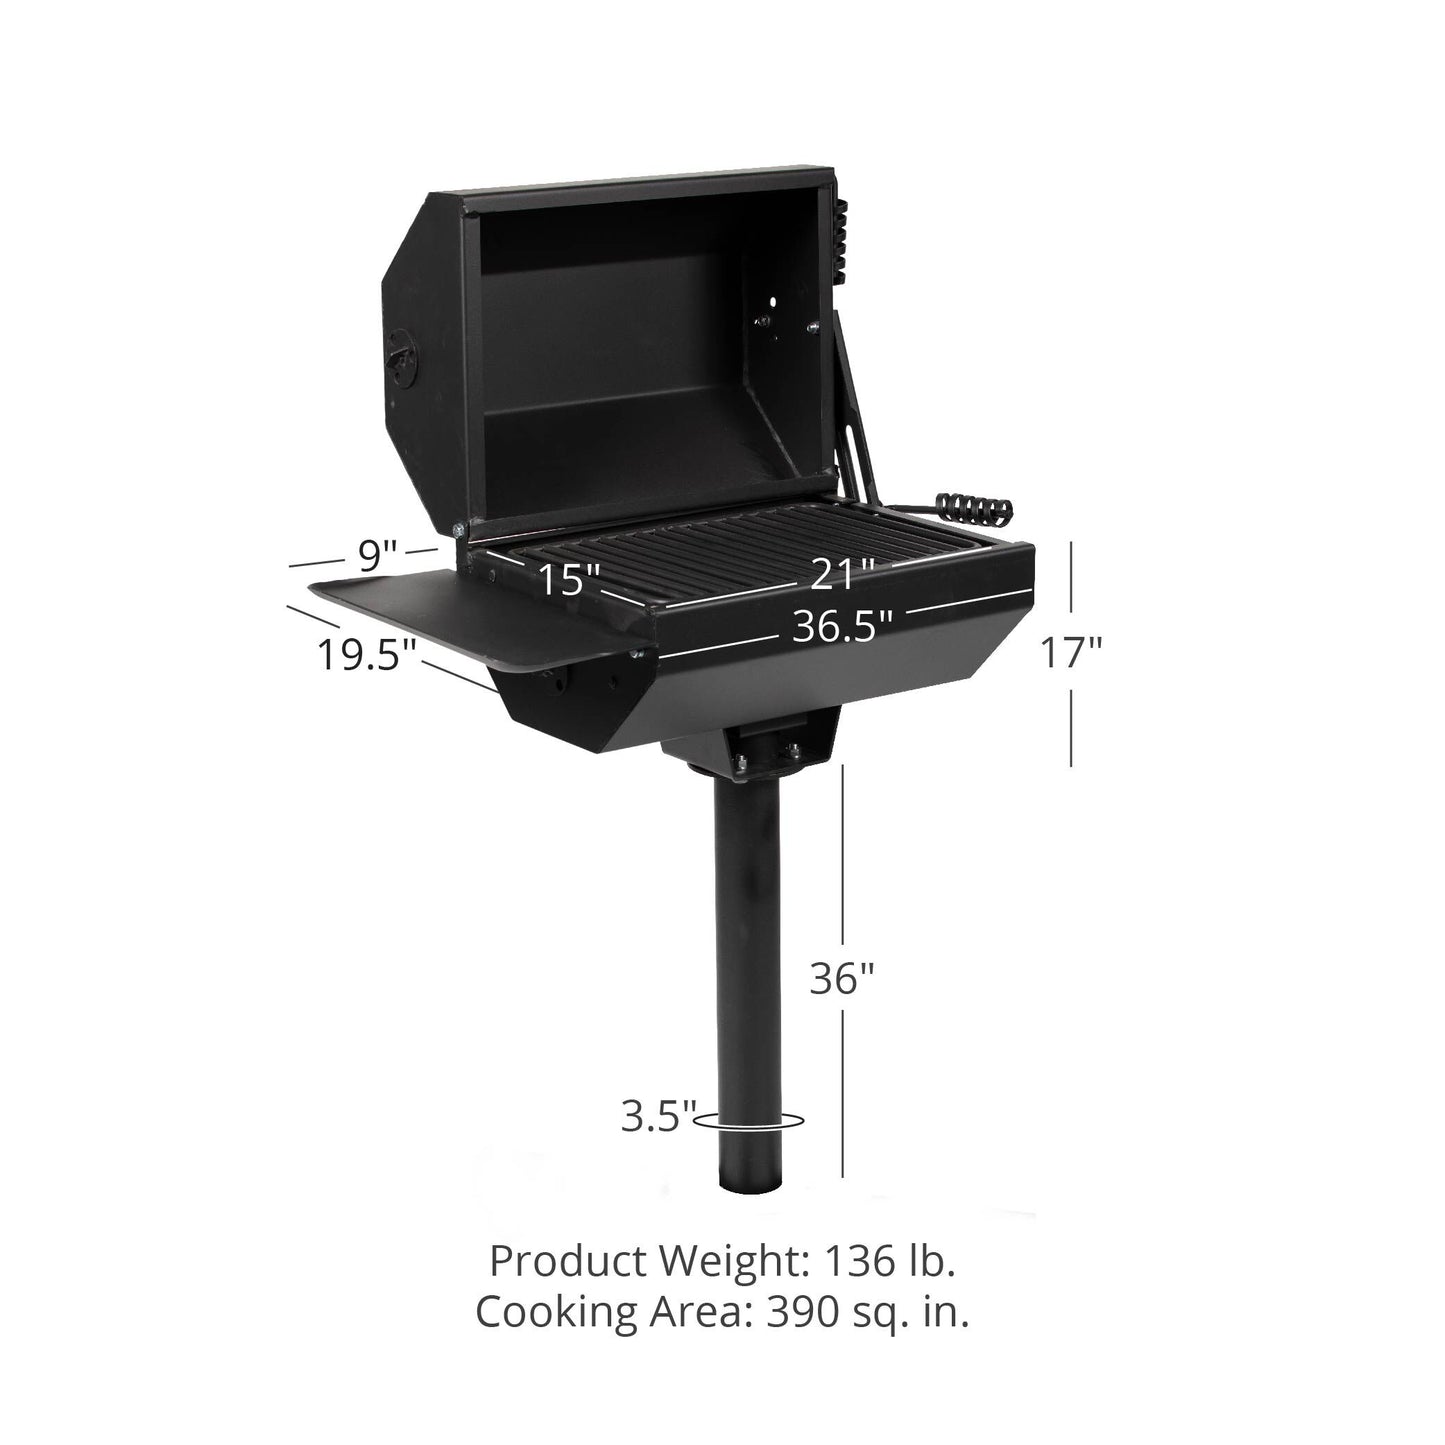 SCRATCH AND DENT - 390 Sq. In. Covered Park-Style Grill with Shelf - FINAL SALE - view 5